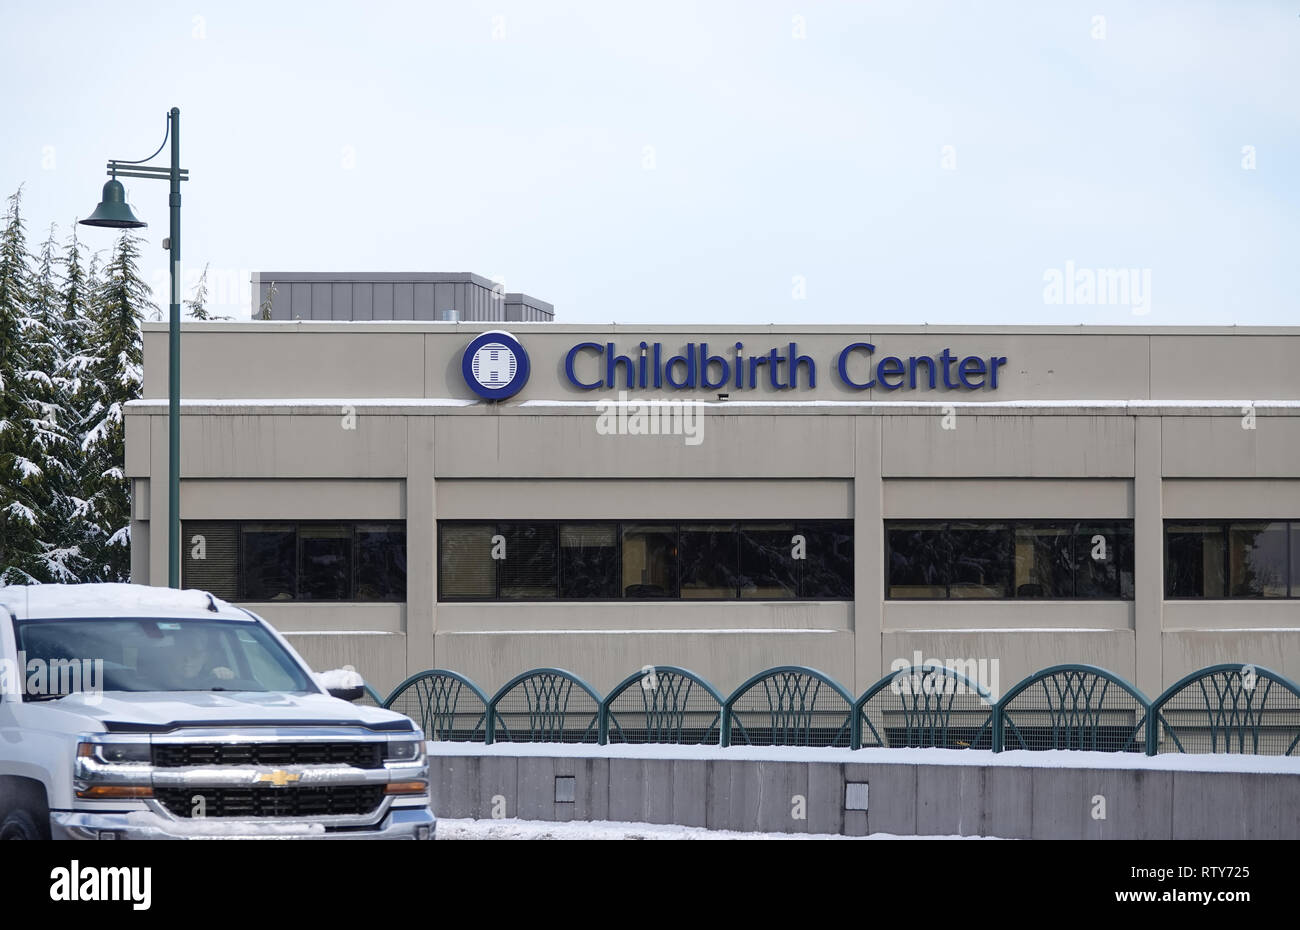 Hospital Childbirth Center building in Bellevue, WA, USA in February 2019 Stock Photo